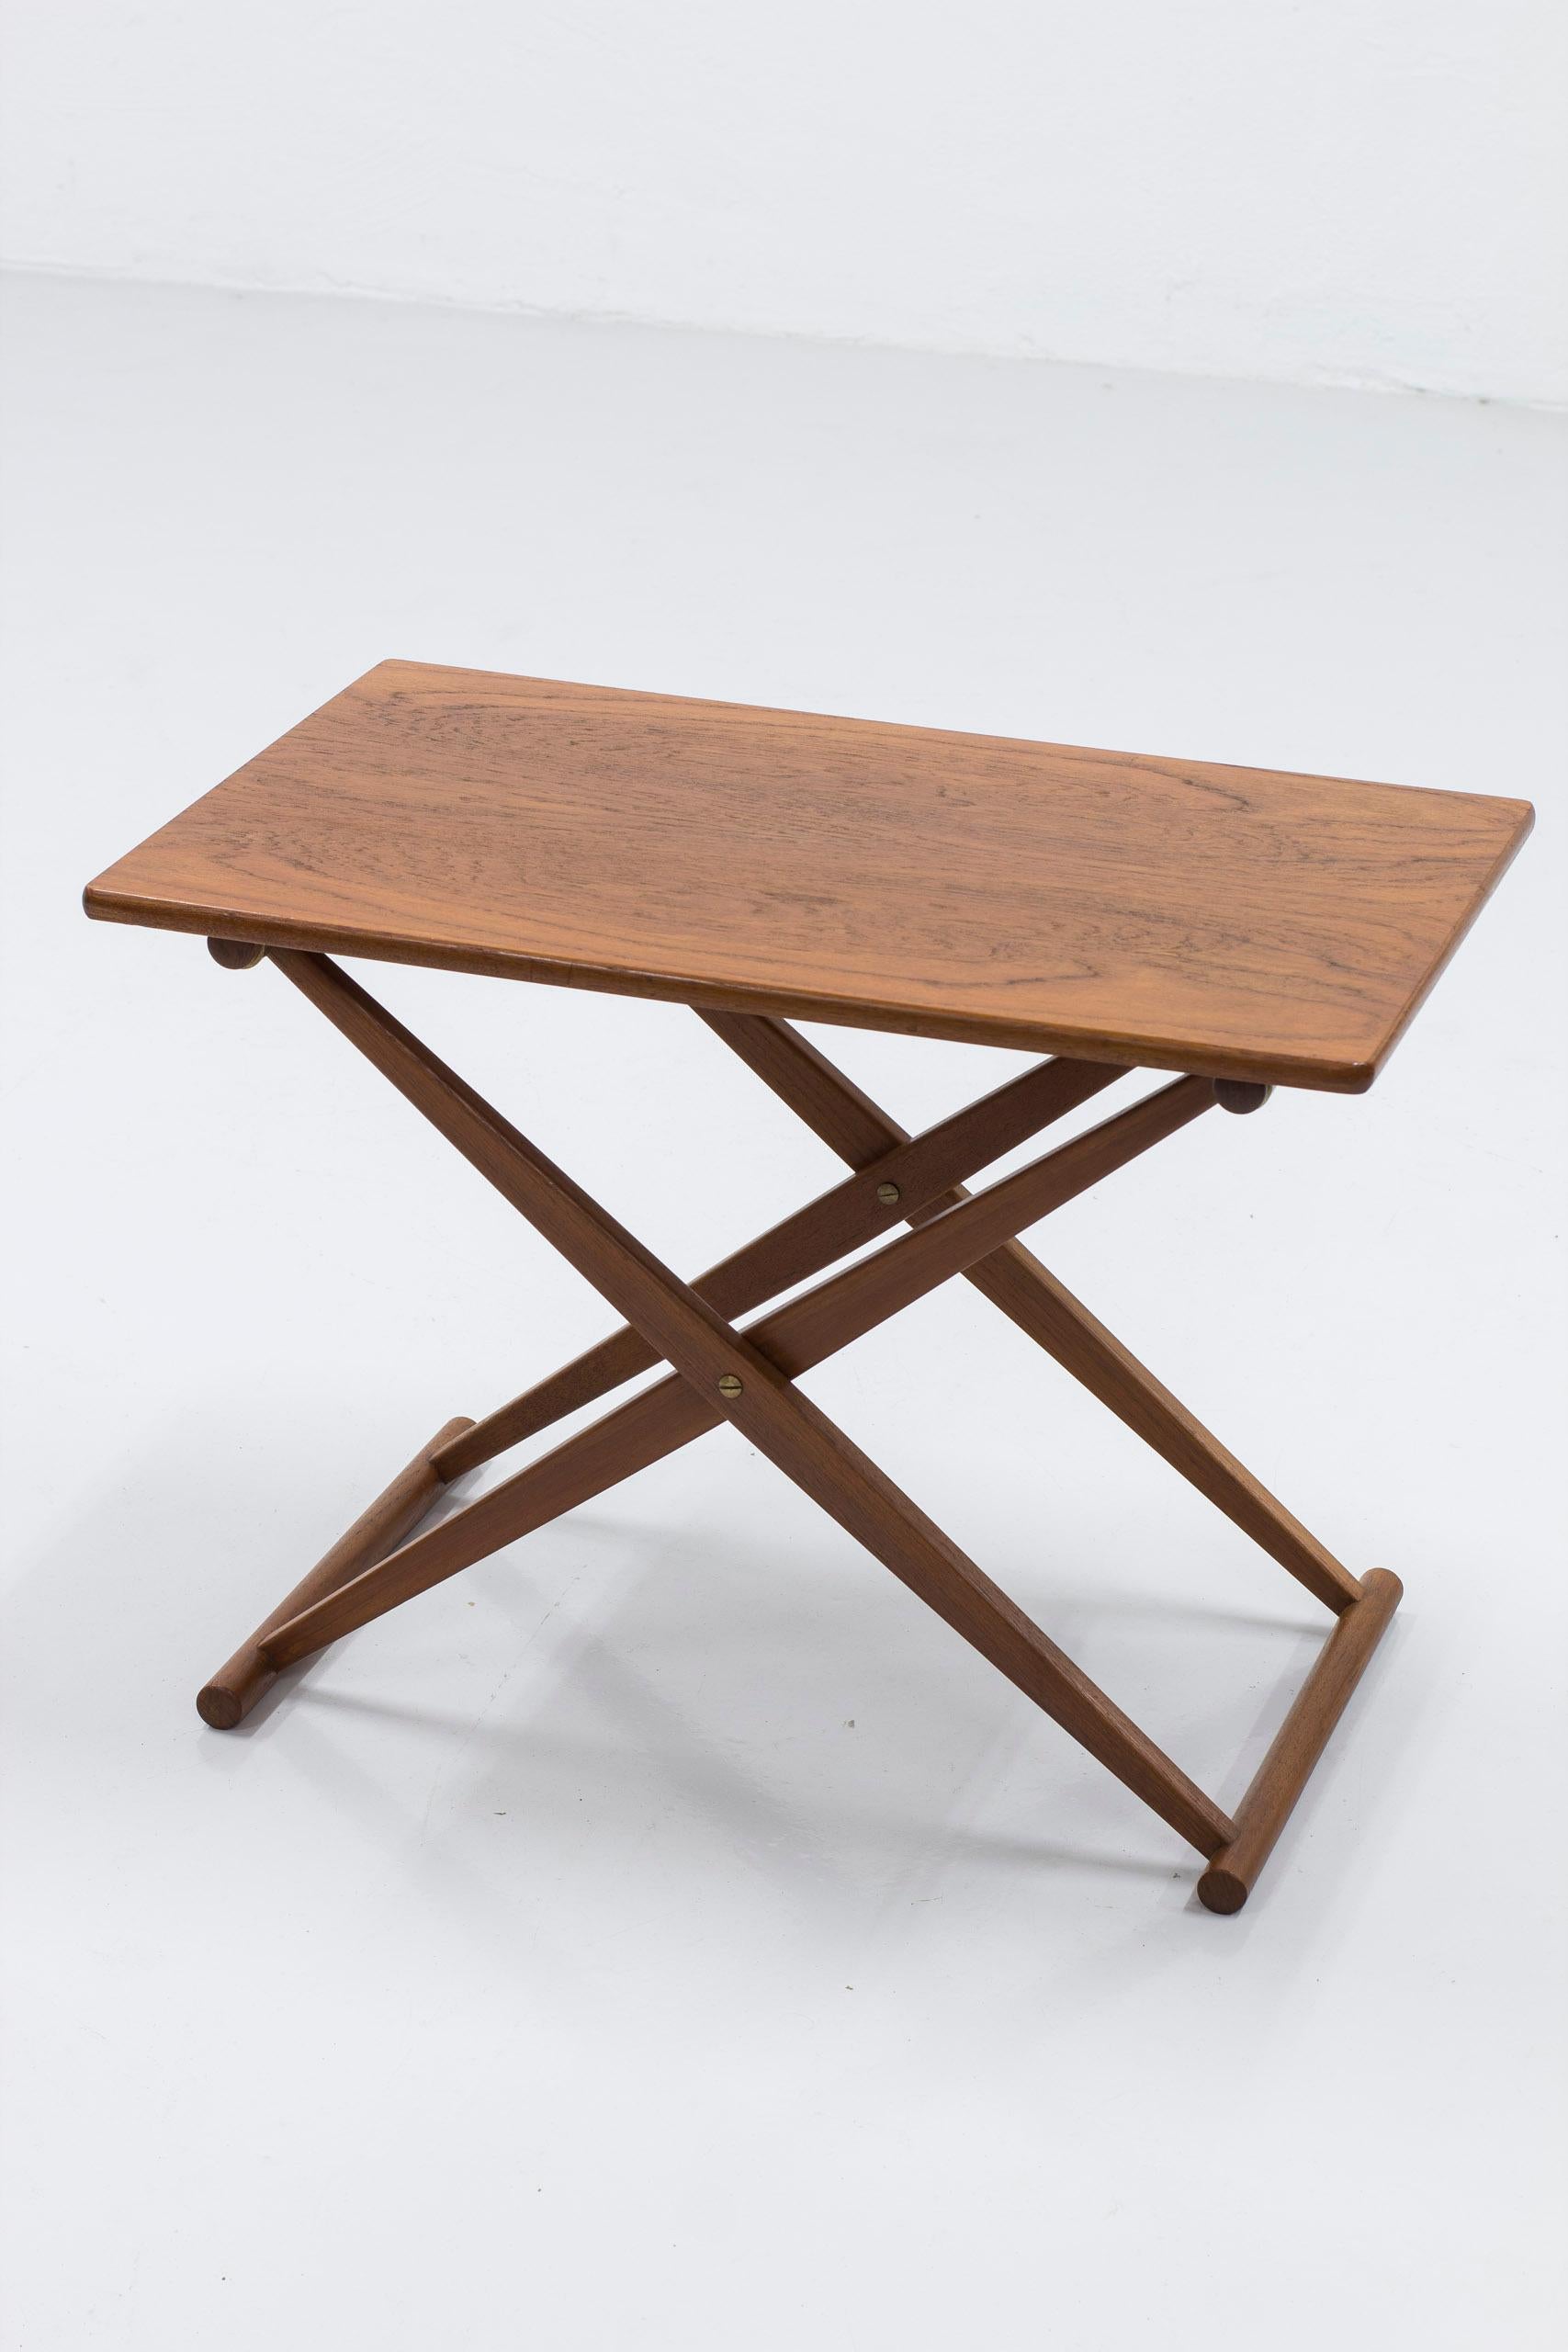 Folding side table designed by Knud Andersen. Produced by Cabinetmaker J.C.A. Andersen in Denmark. Made during the 1950s. Solid teak base with brass details and table top in teak. The table folds together easily for storage. Very good vintage